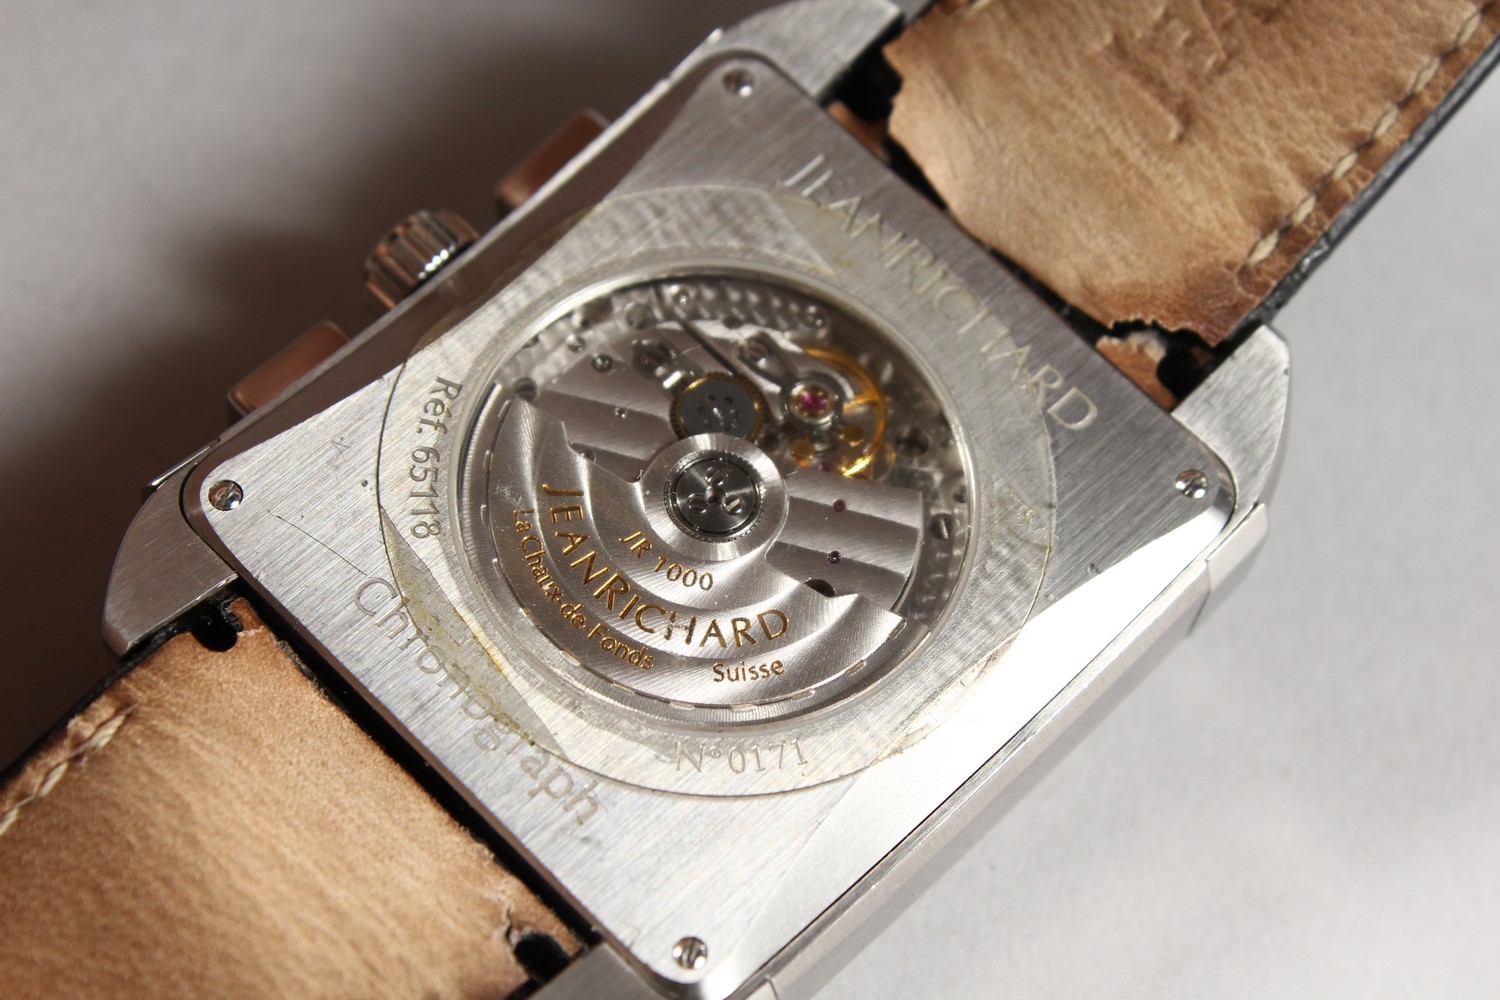 JEAN RICHARD CHRONOGRAPH, Ref. 65110, with leather strap, in original box. - Image 6 of 8